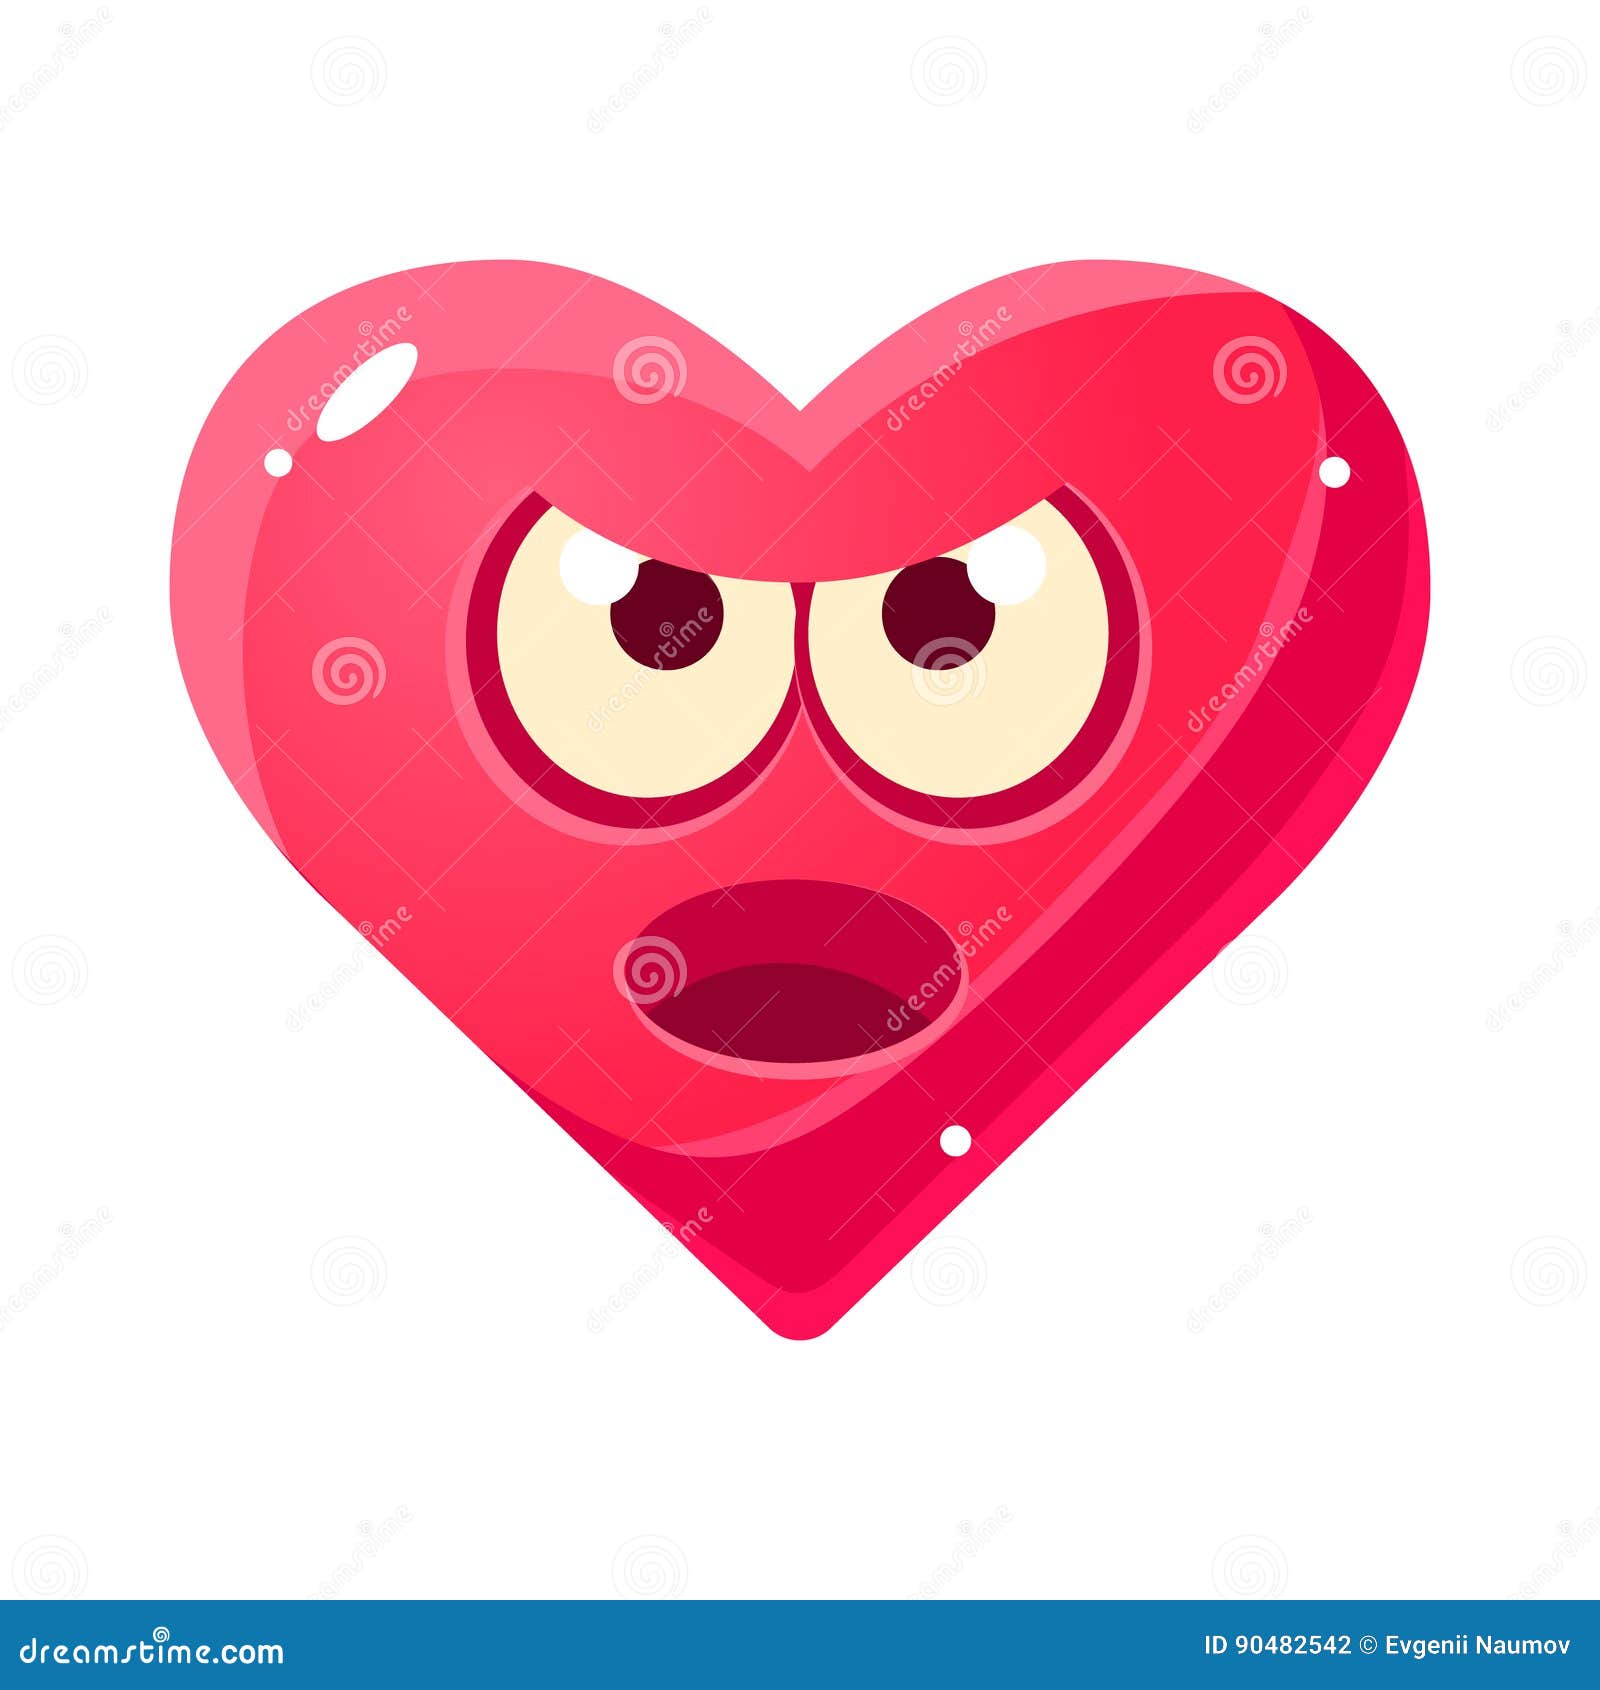 Angry and Annoyed Emoji, Pink Heart Emotional Facial Expression Isolated  Icon with Love Symbol Emoticon Cartoon Stock Vector - Illustration of  heart, bigeyed: 90482542